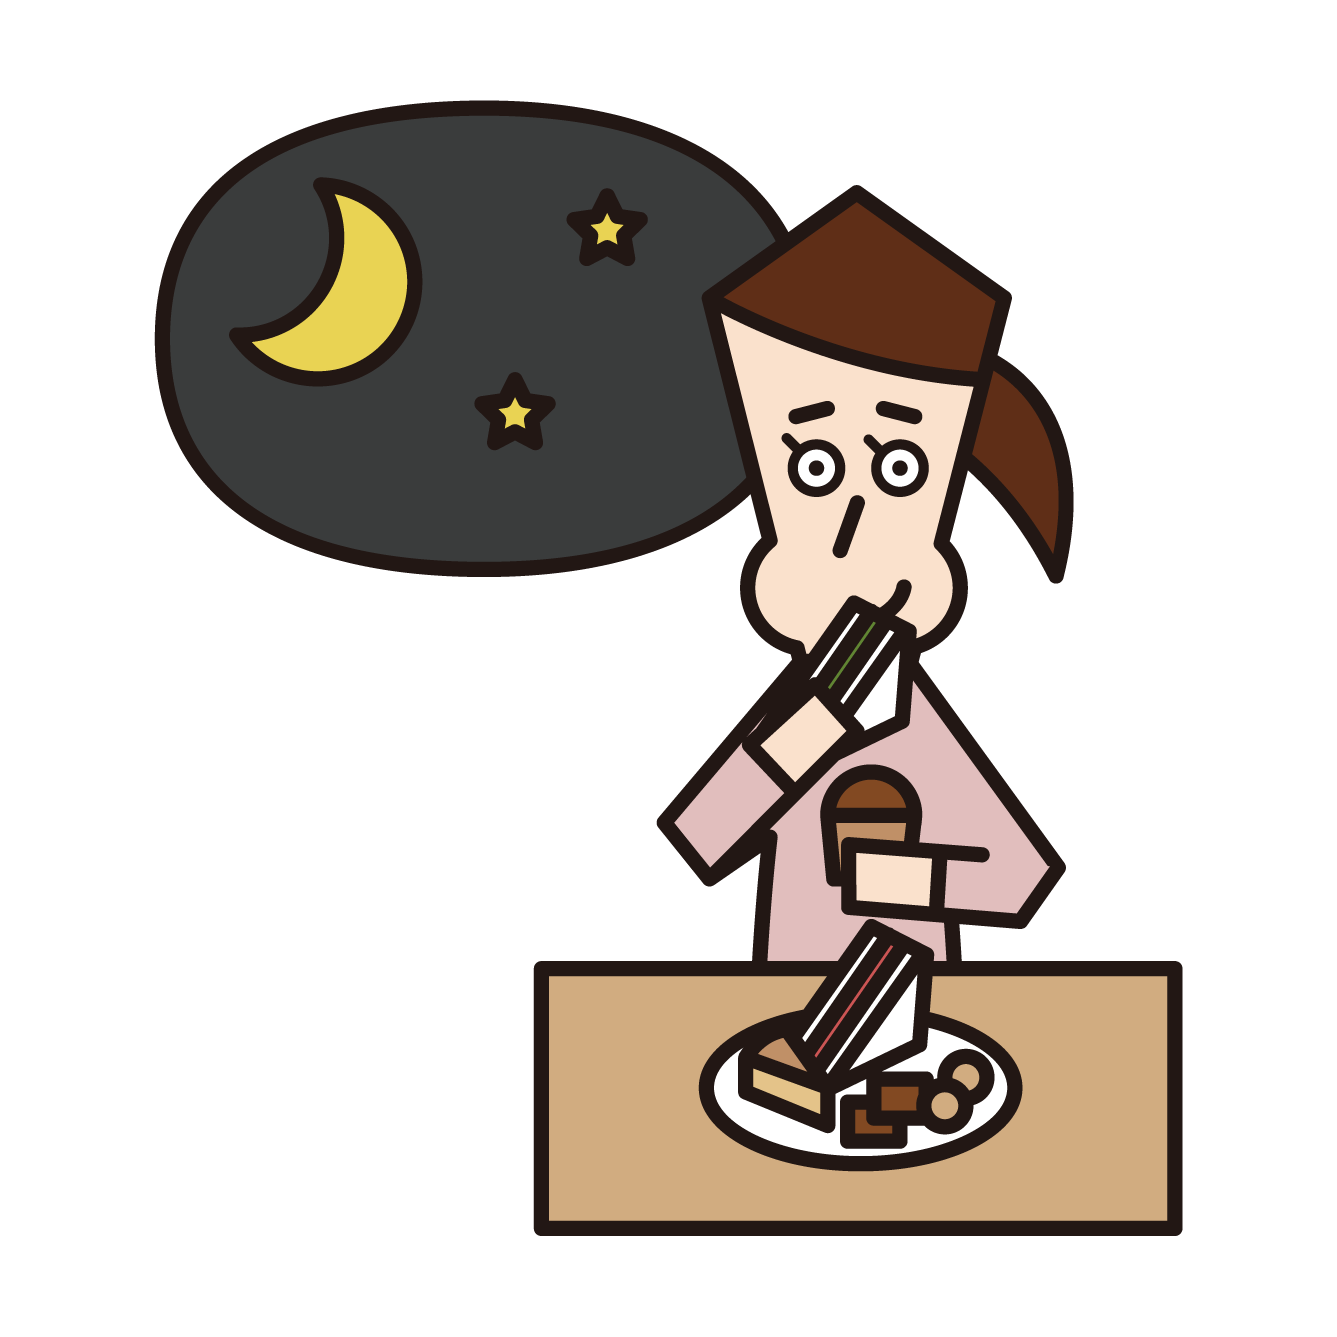 Illustration of a woman who eats noodles for a late night snack